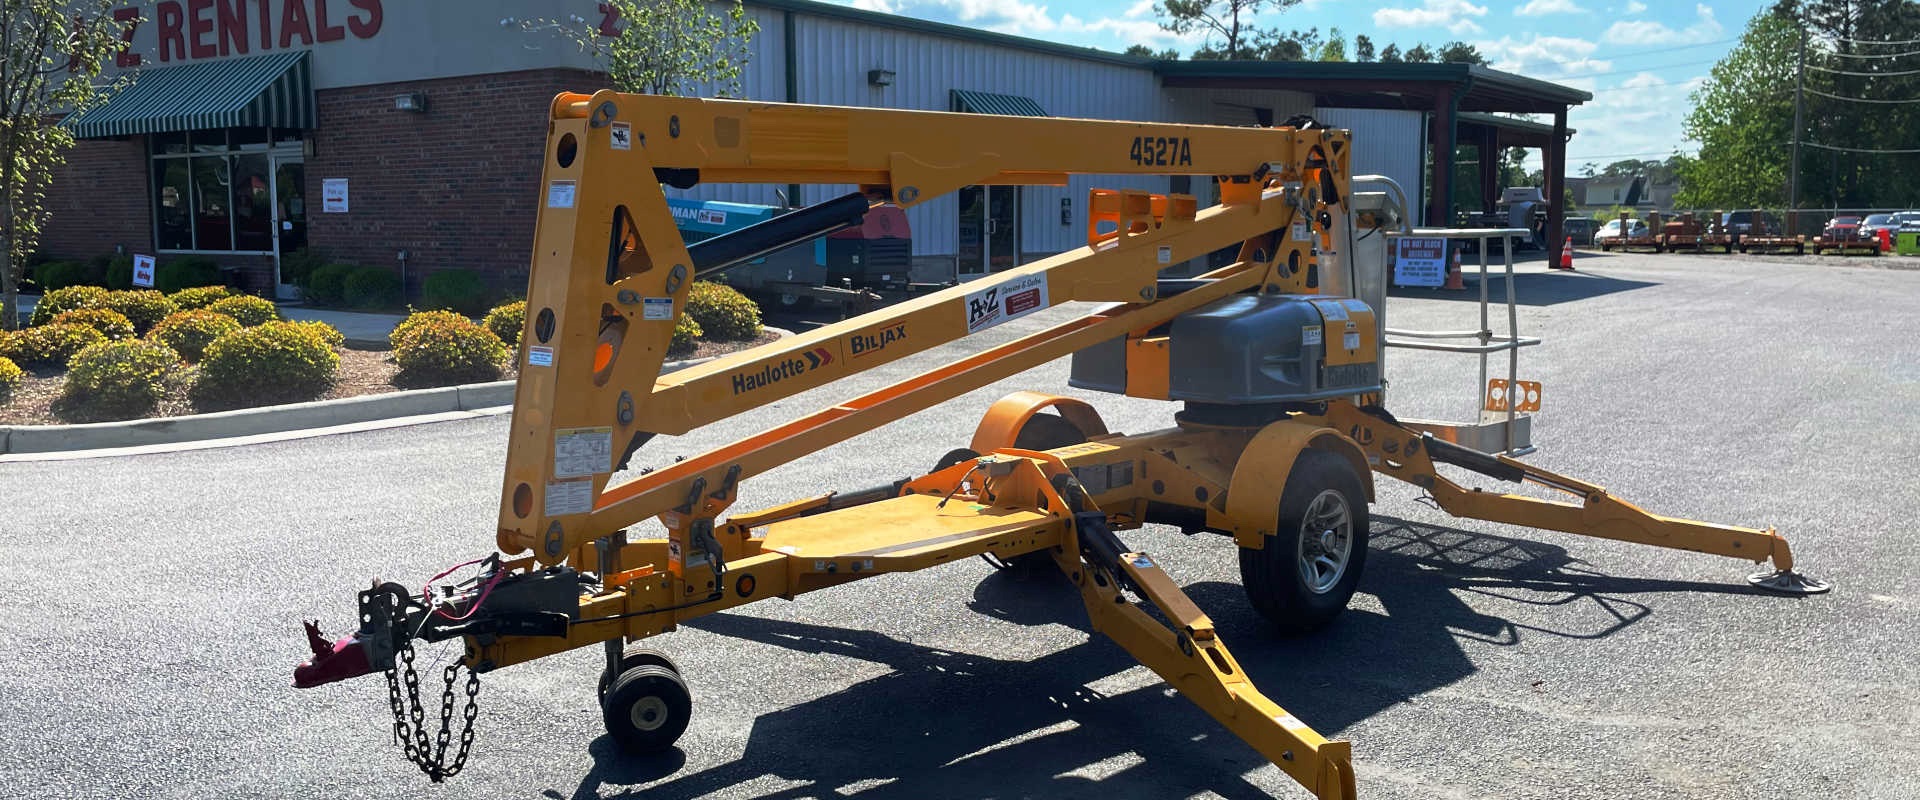 Pre-Owned Boom Lift Equipment Rentals in Wilmington, NC and Charleston, SC